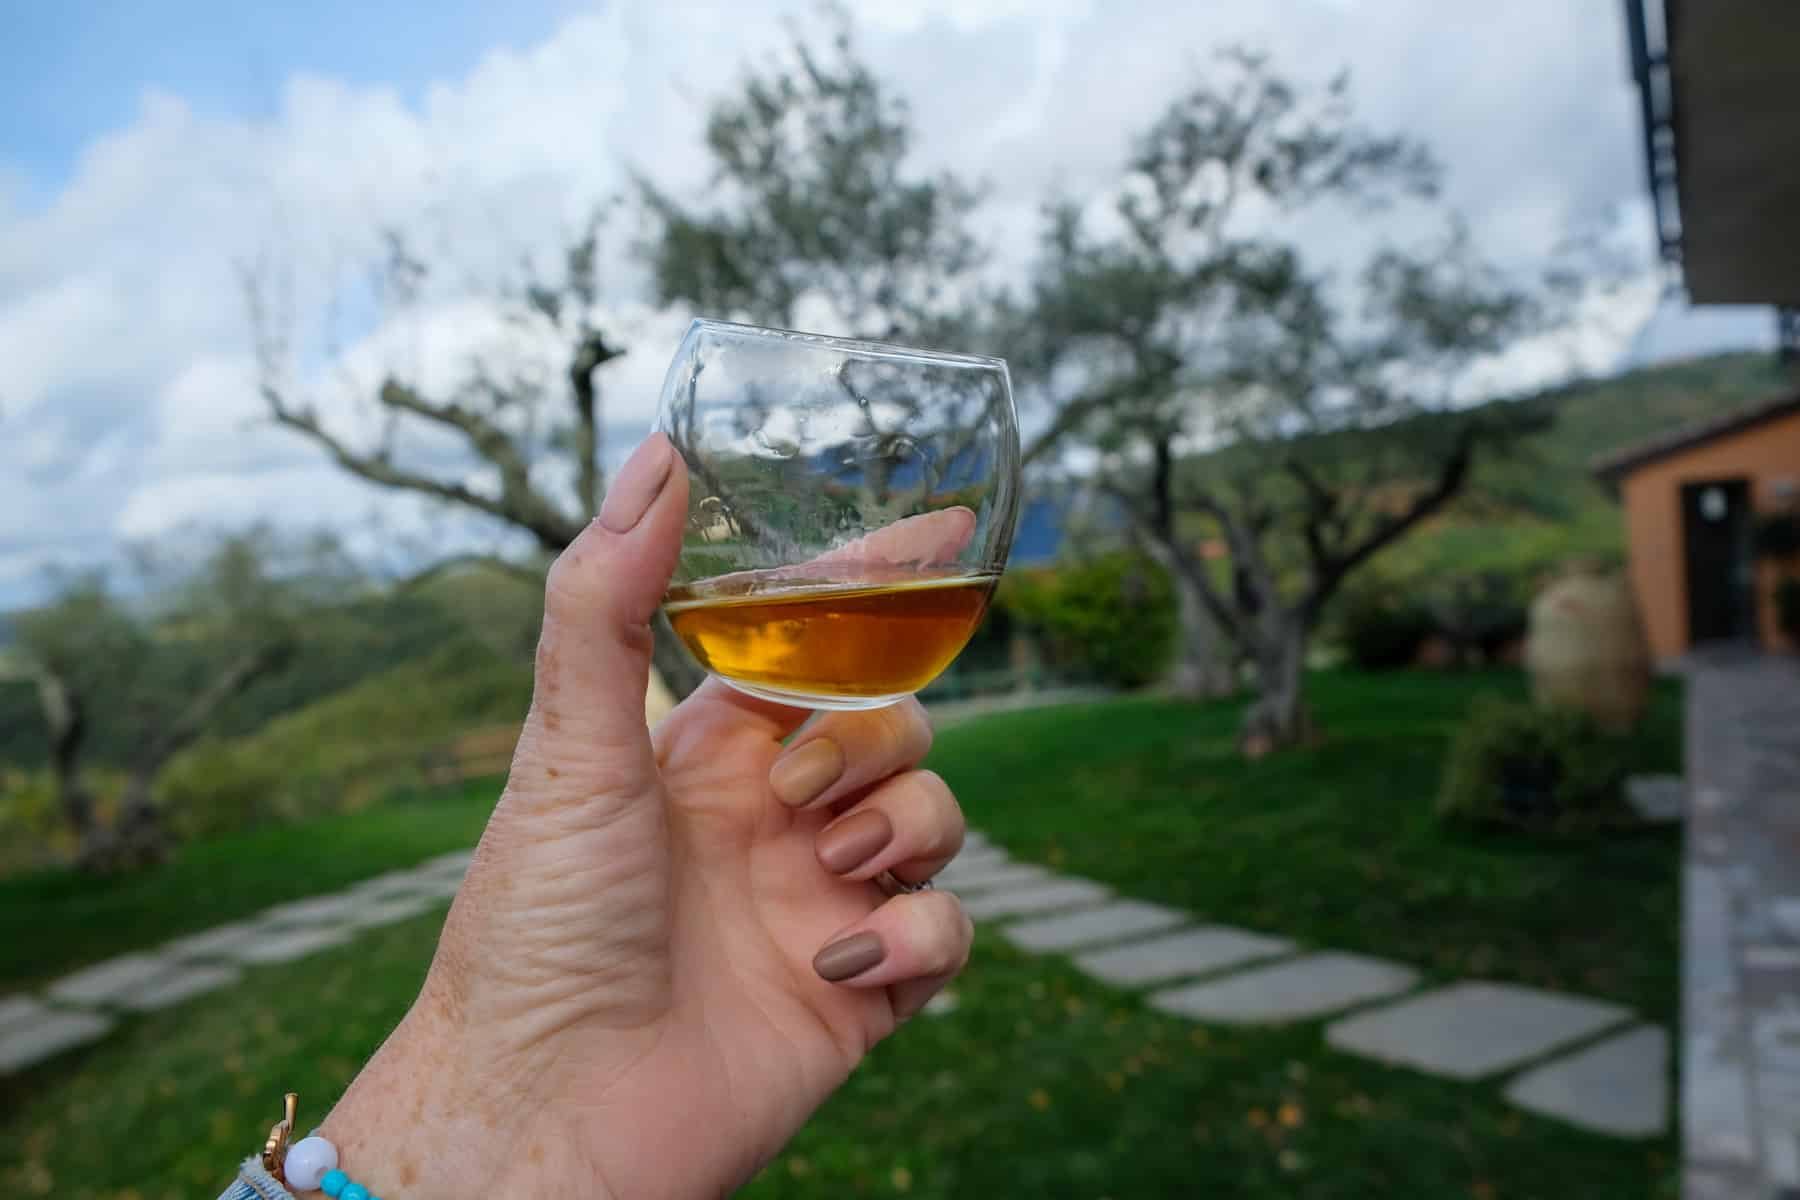 A person holding a glass of wine in front of a house in Istria.